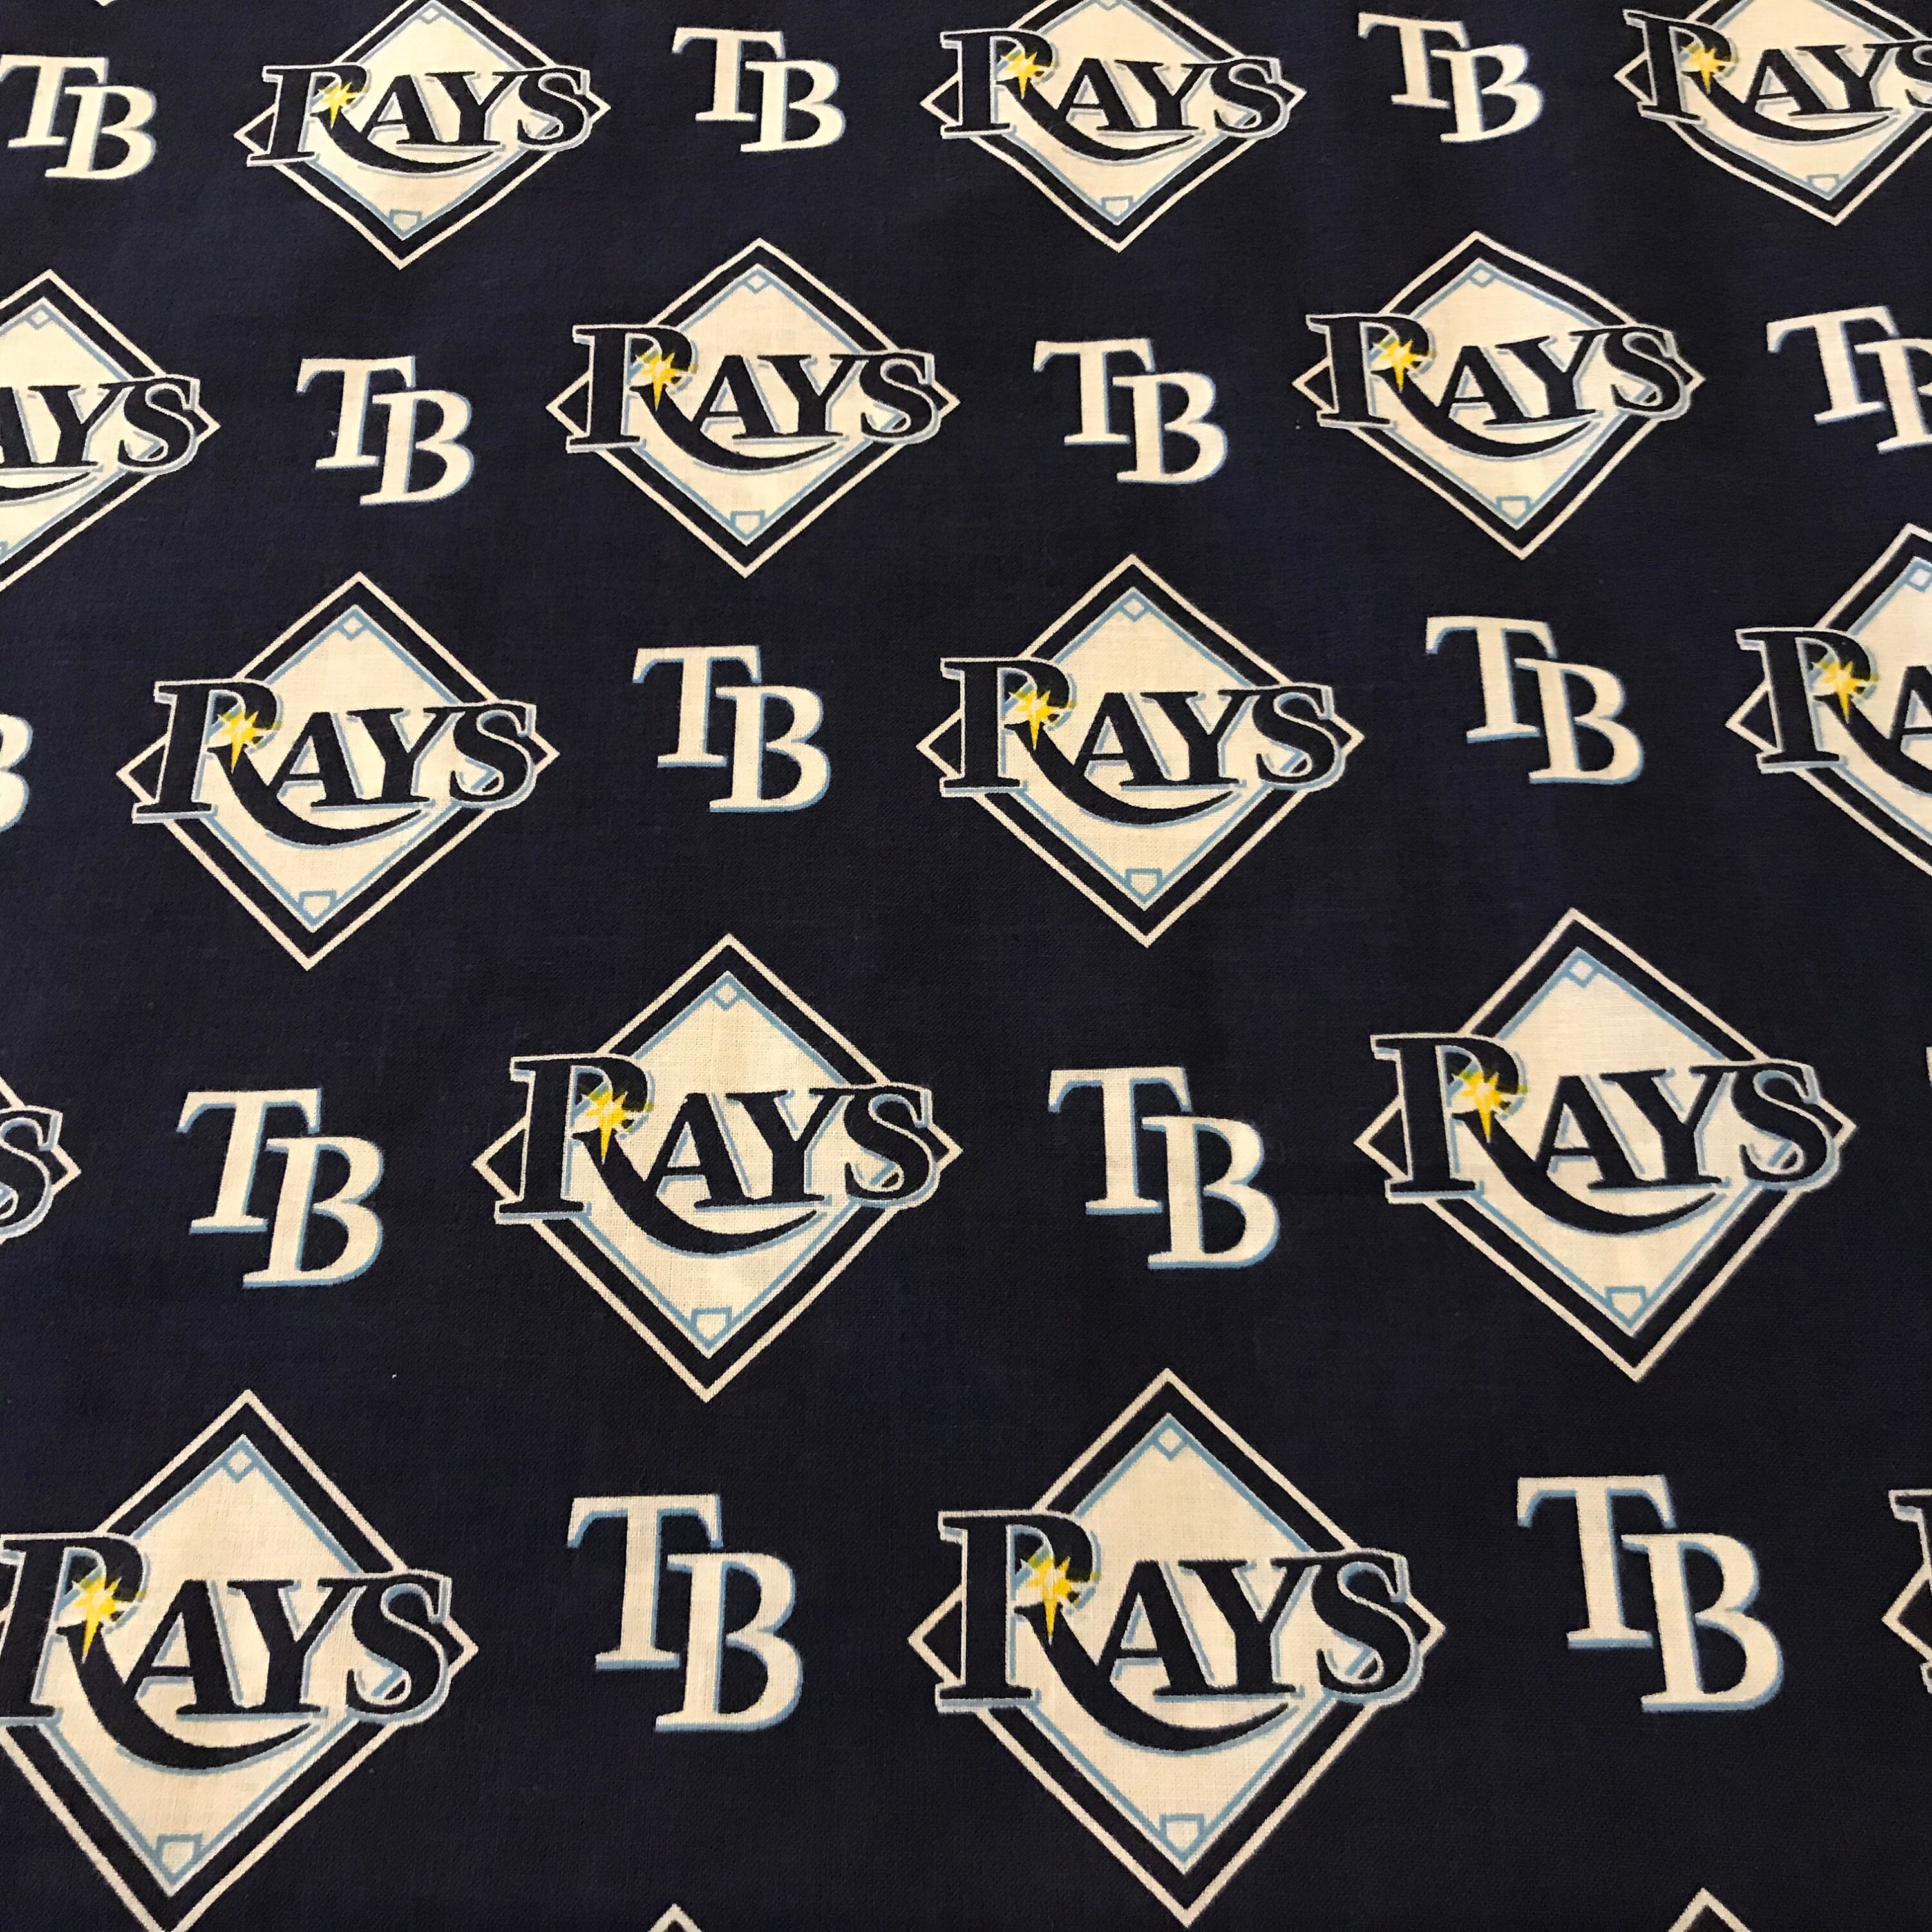 Custom Tampa Bay Rays Baseball Jersey Exciting Camo TB Rays Gift -  Personalized Gifts: Family, Sports, Occasions, Trending